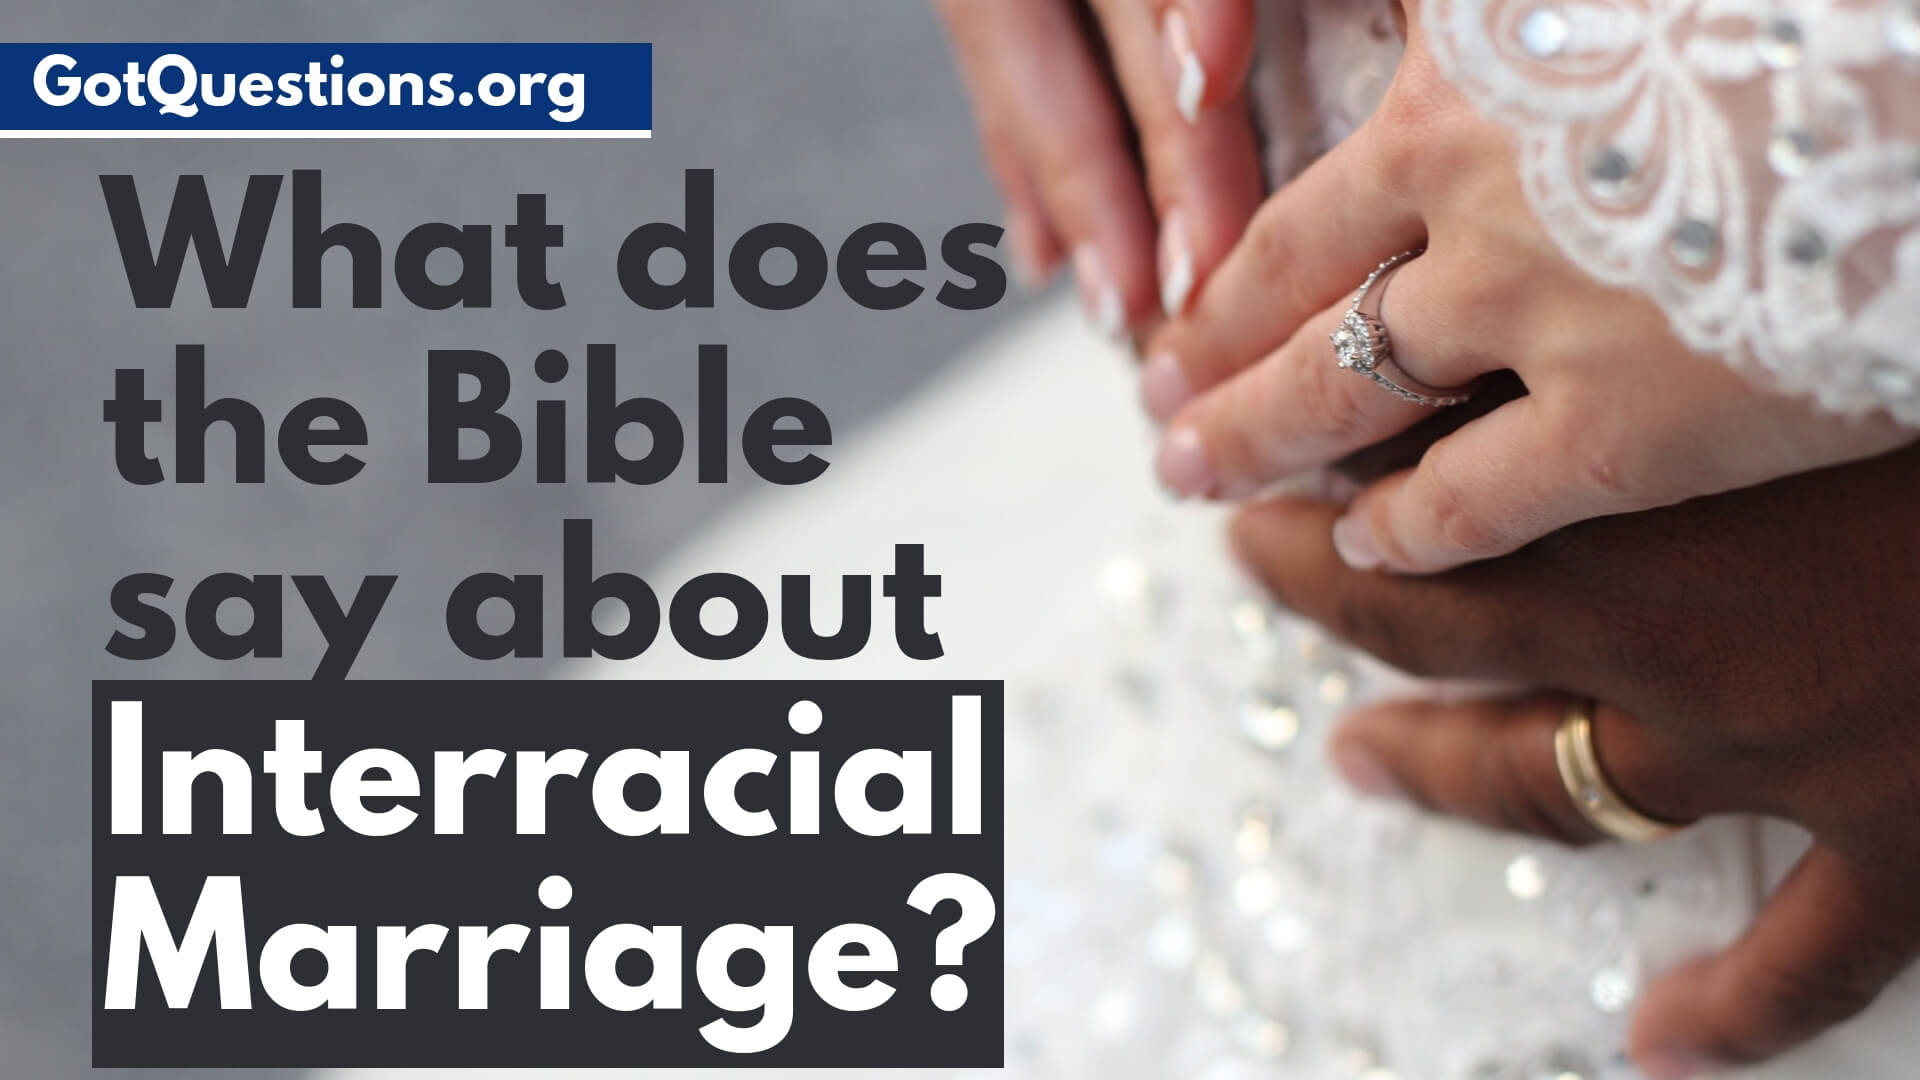 what does the bible say about interracial marriage?